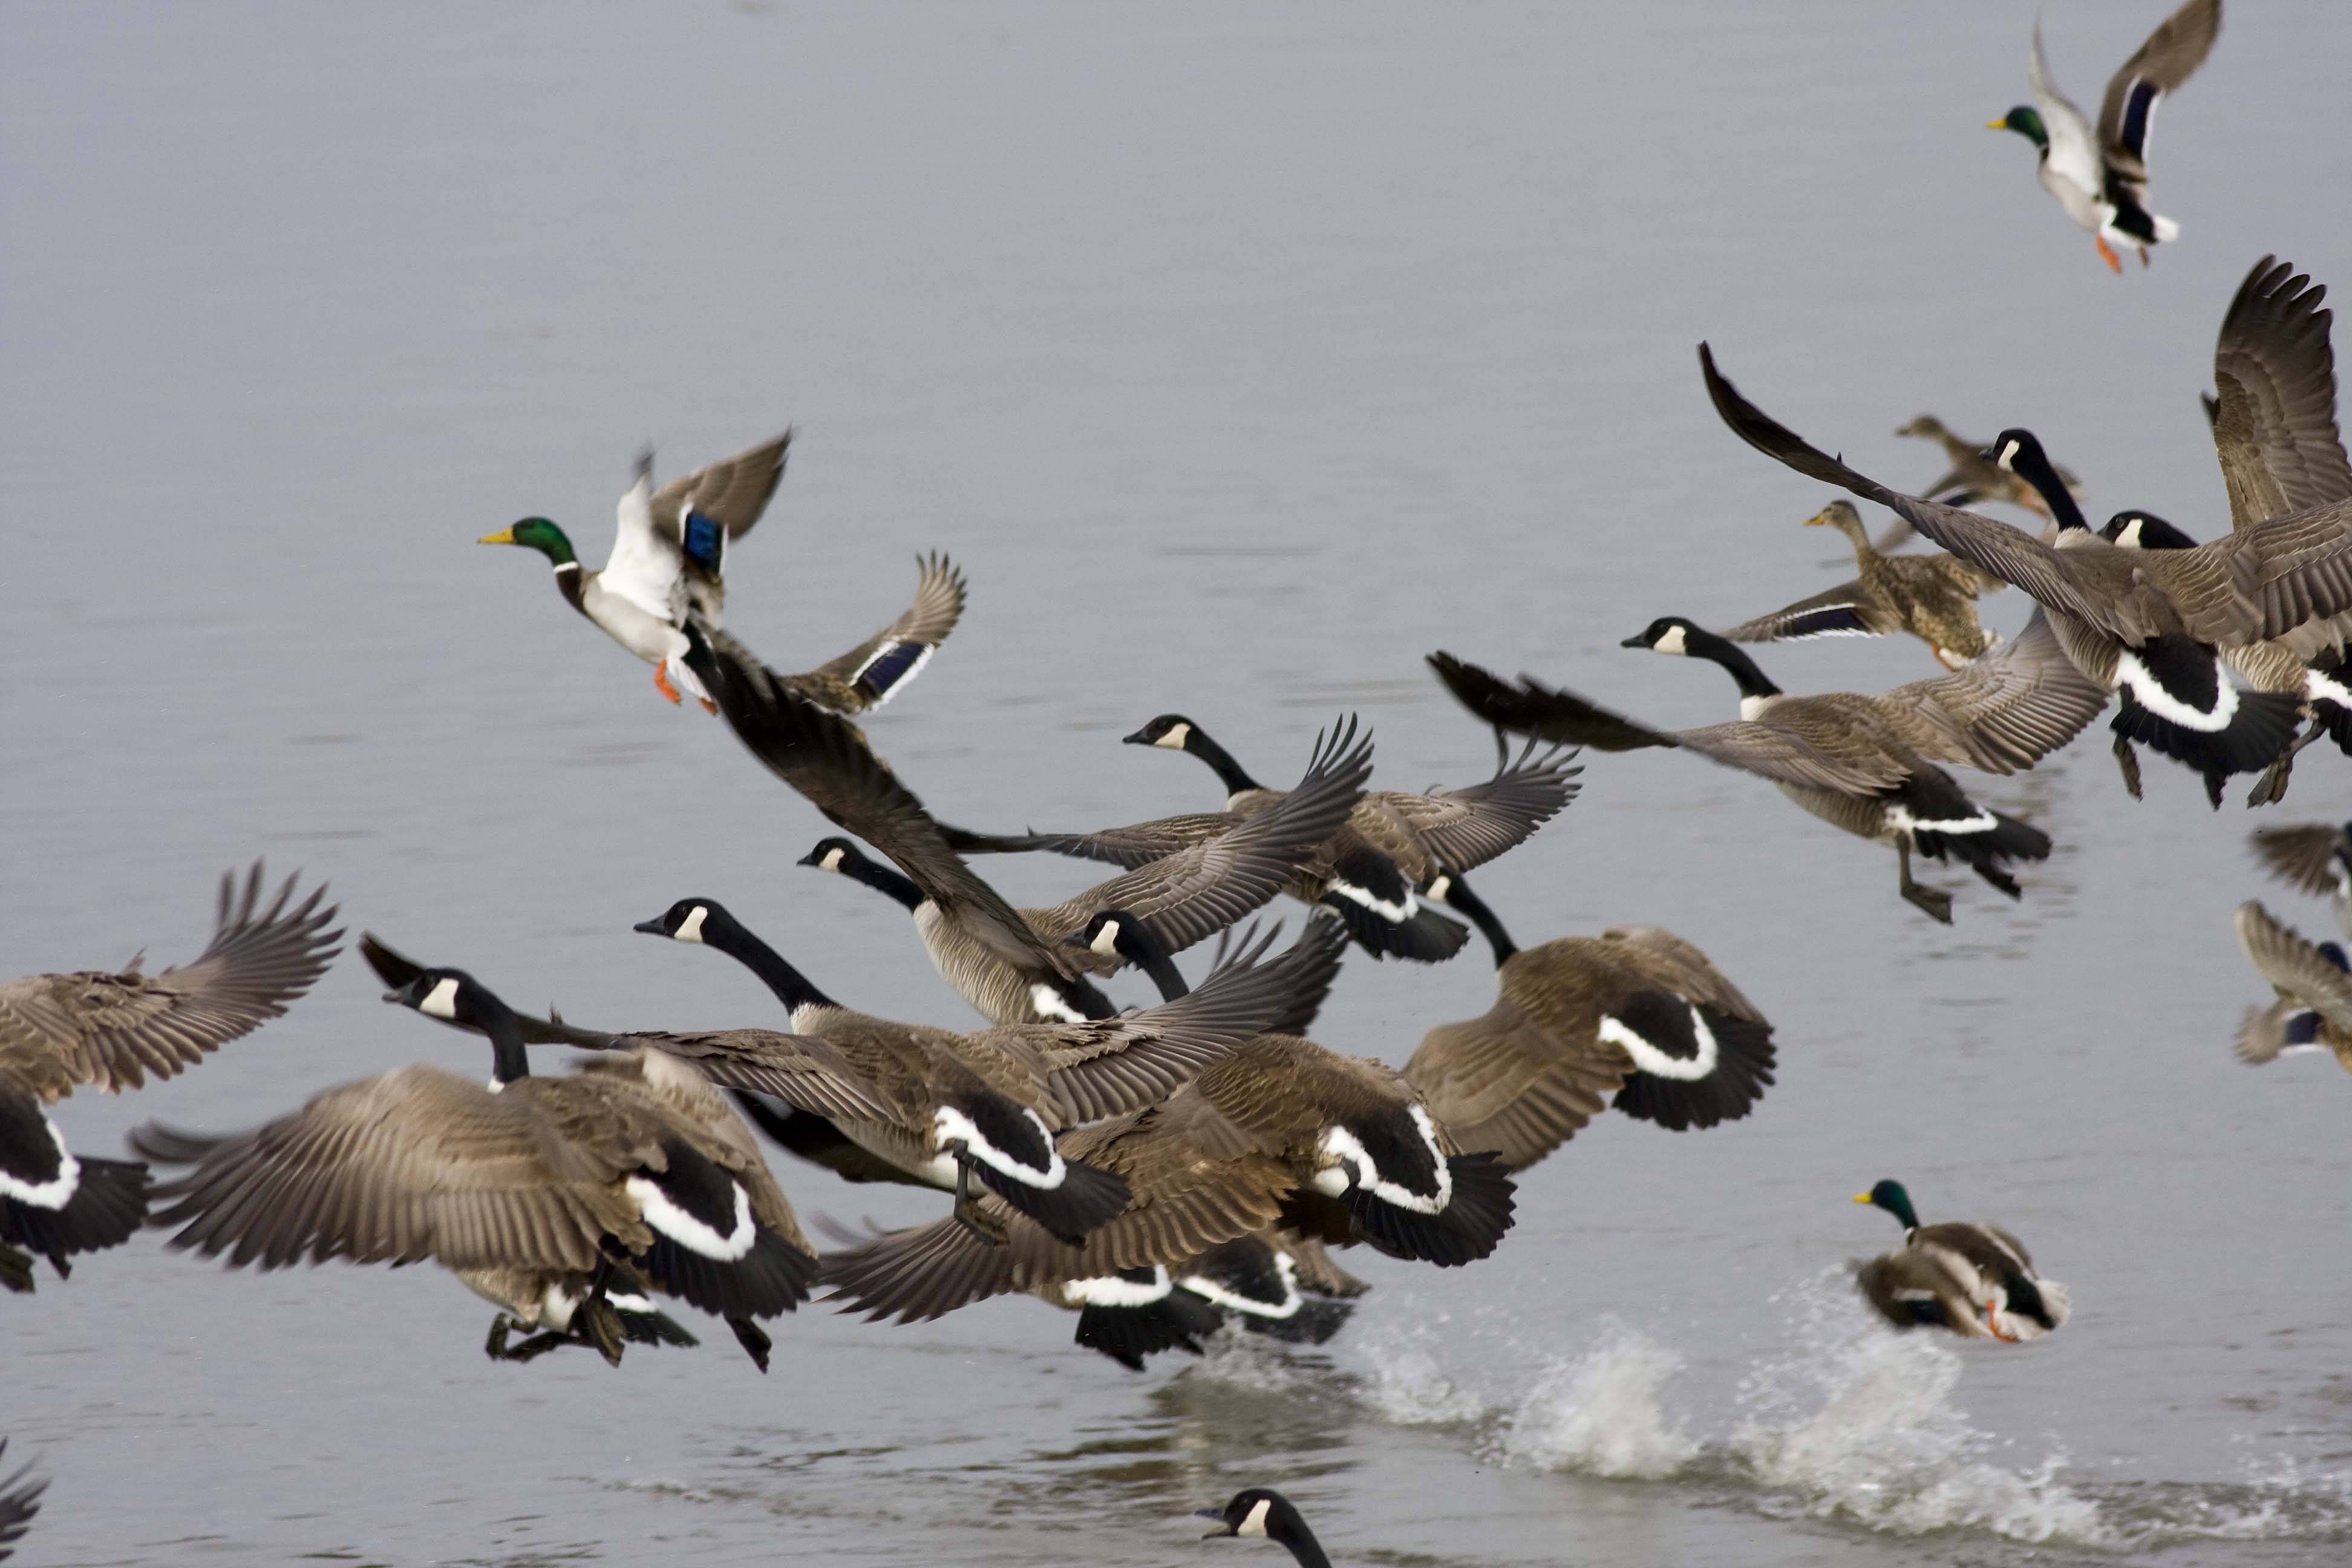 Canada geese and ducks lifting off from the water, close to the Lewis and Clark trail